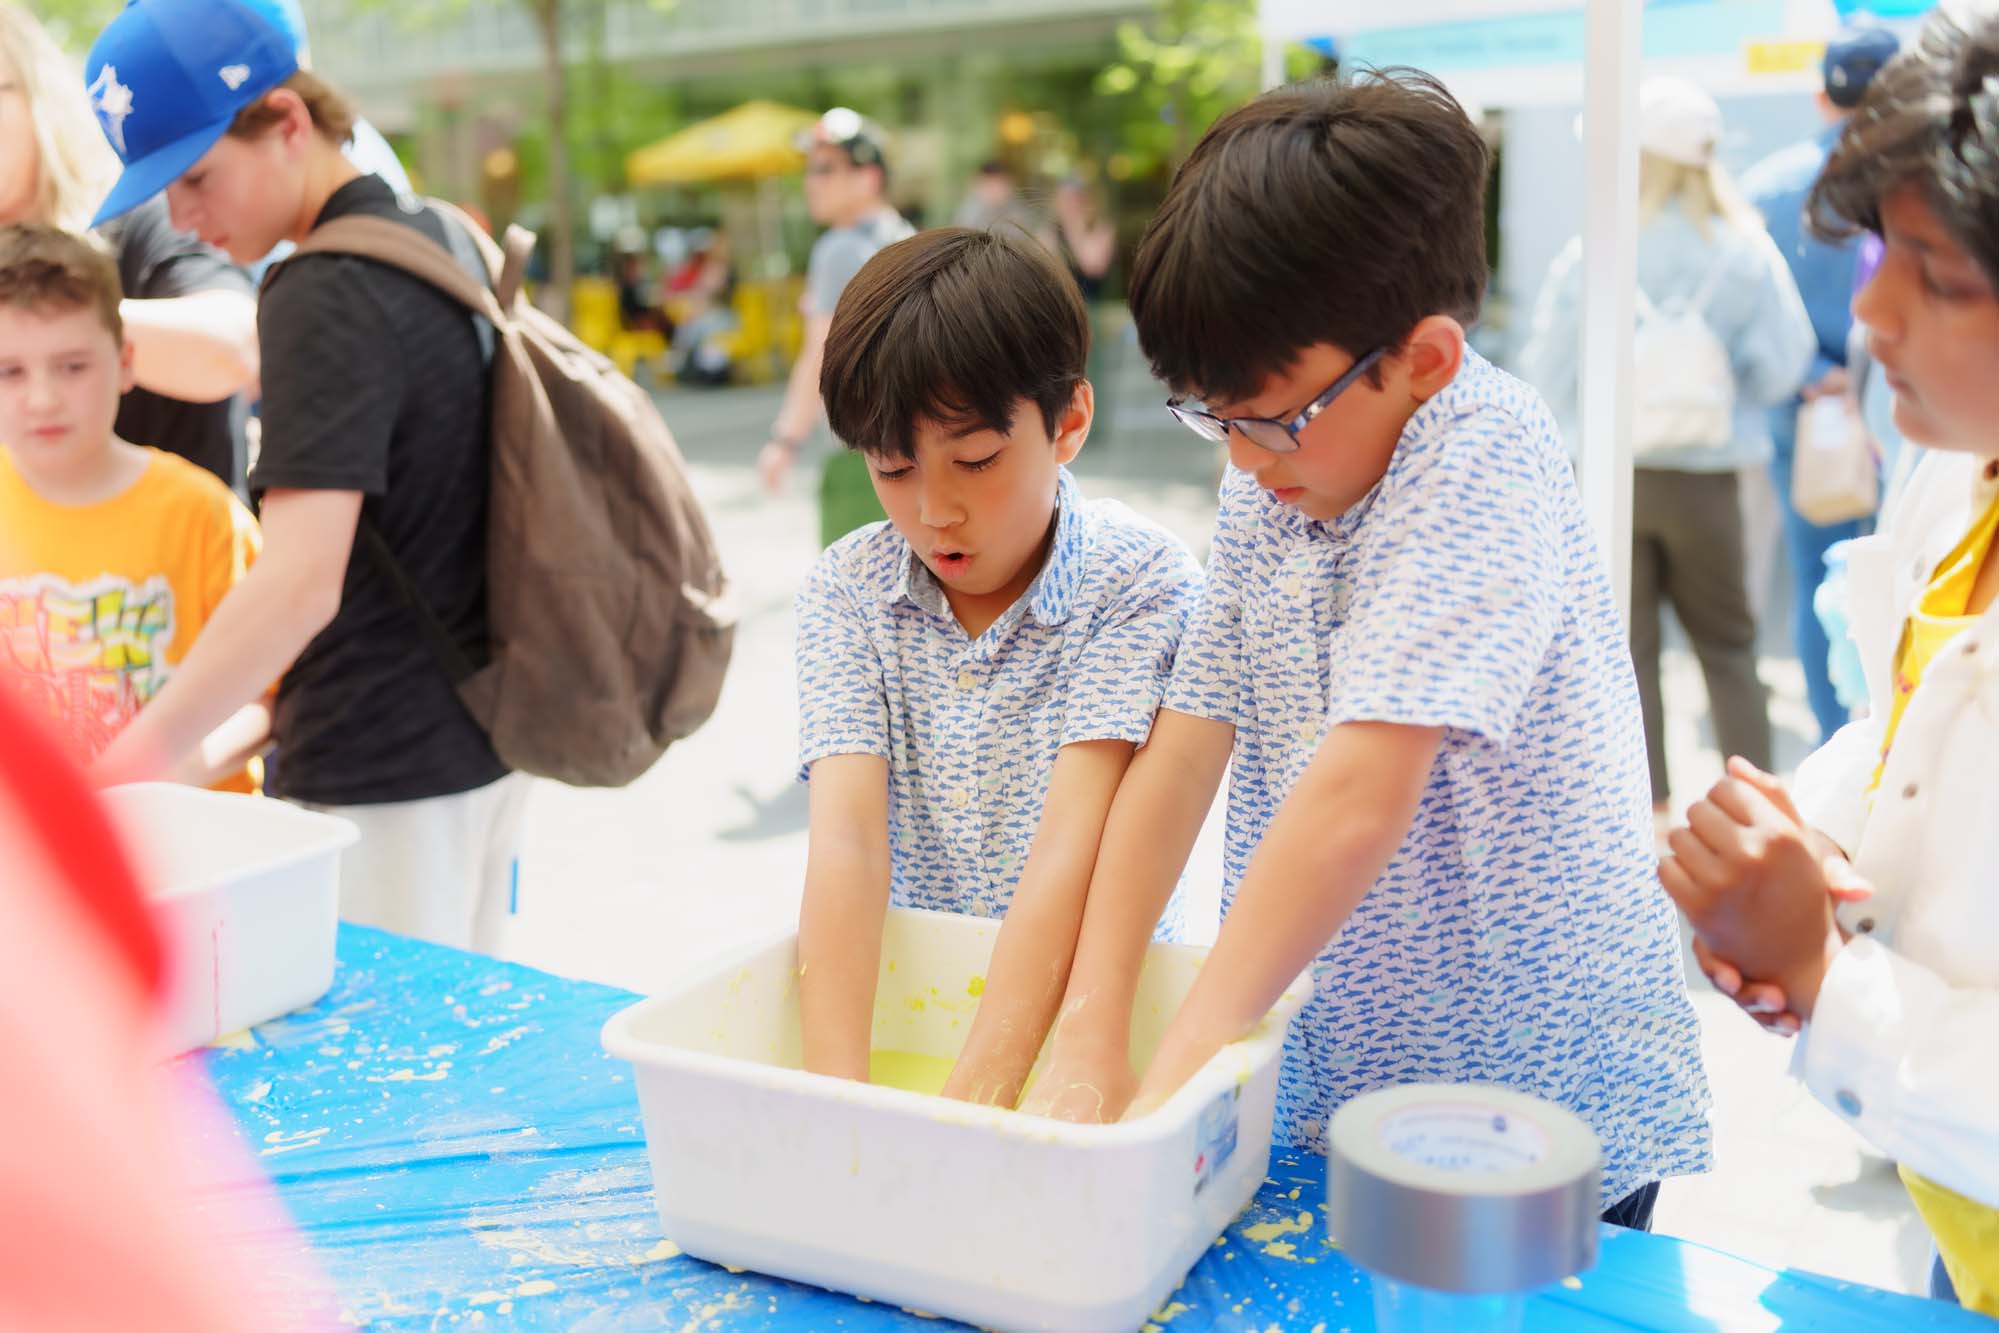 Two kids playing with the yellow slime in a white container at the booth.